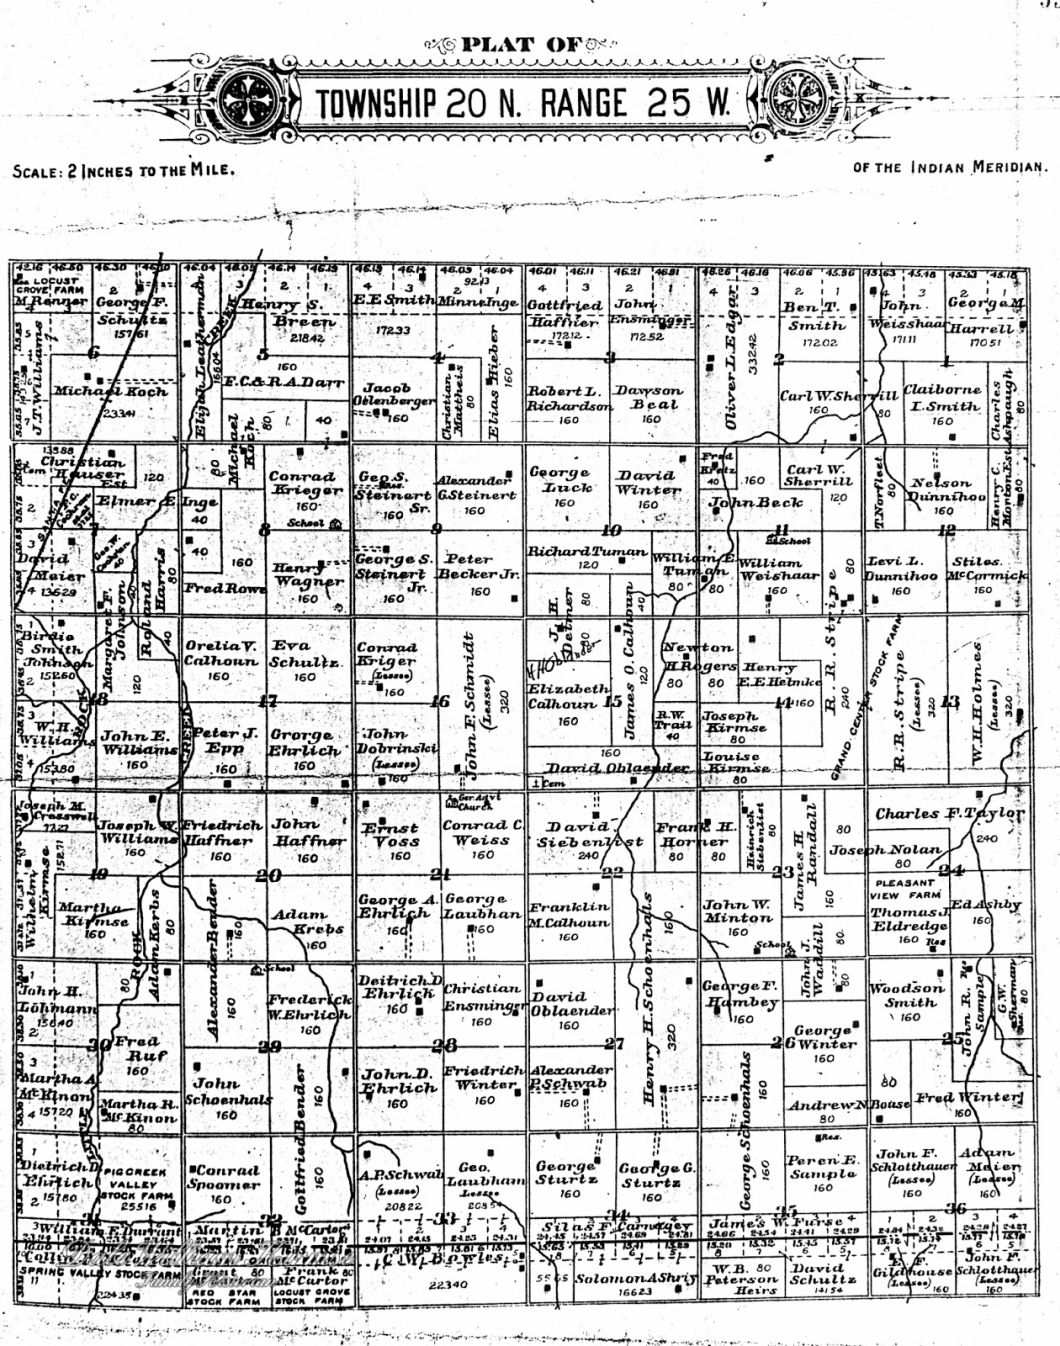 Ownership map of  Ohio Township (Township 20 North Range 25 West of the Indian Meridian, Oklahoma).  The Wilhelm Kirmse and Martha Kirmse[2] properties are noted in section 19[4].